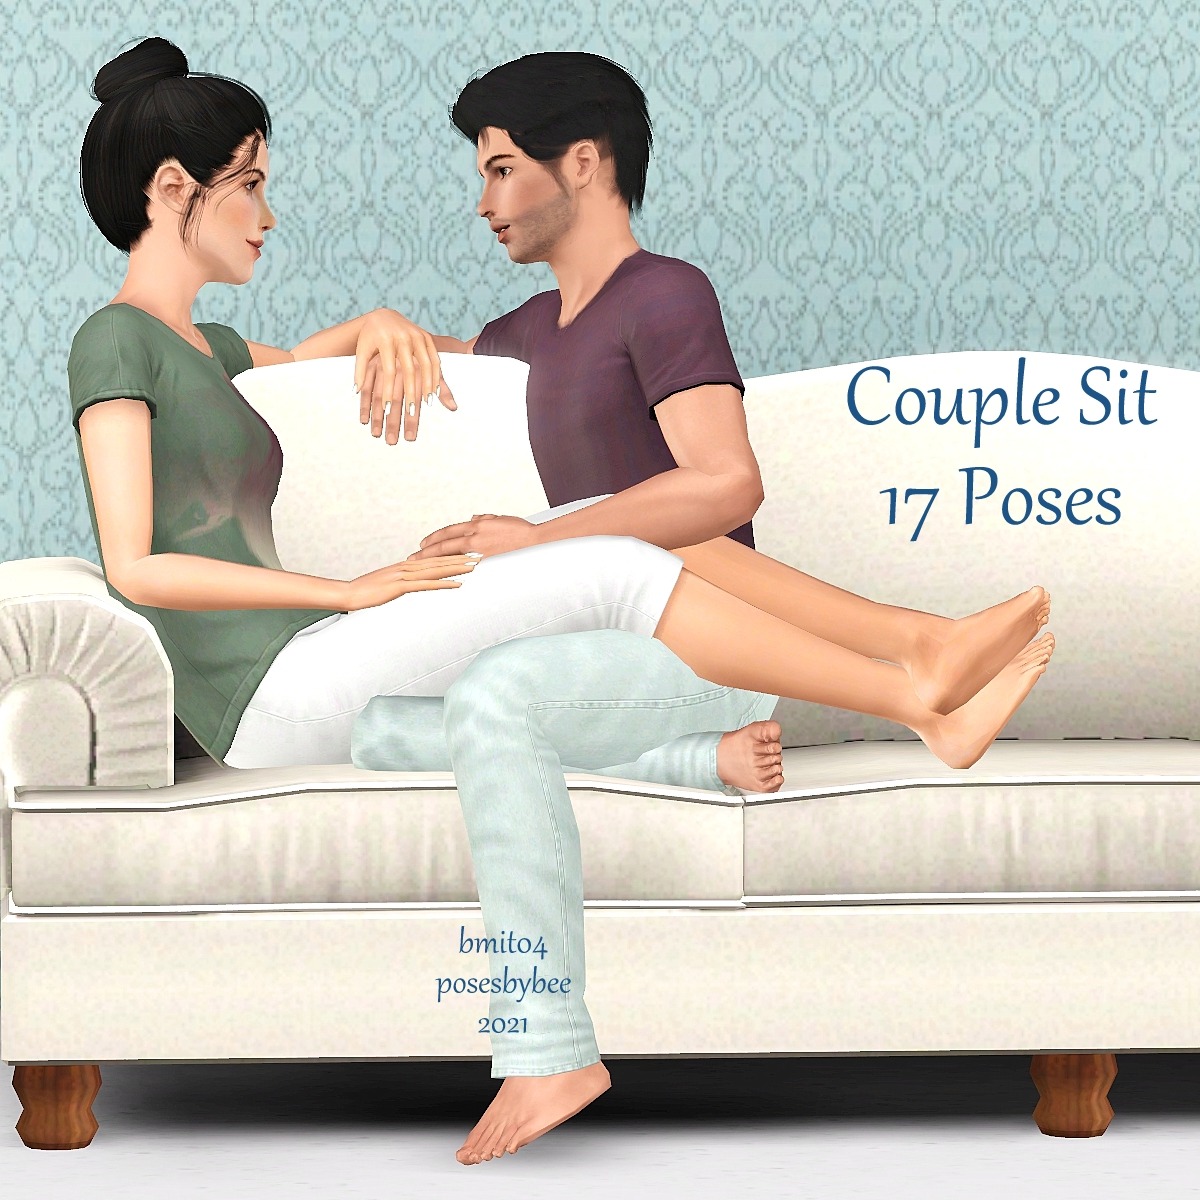 Engagement Interview Posepack - The Sims 4 Download - SimsFinds.com